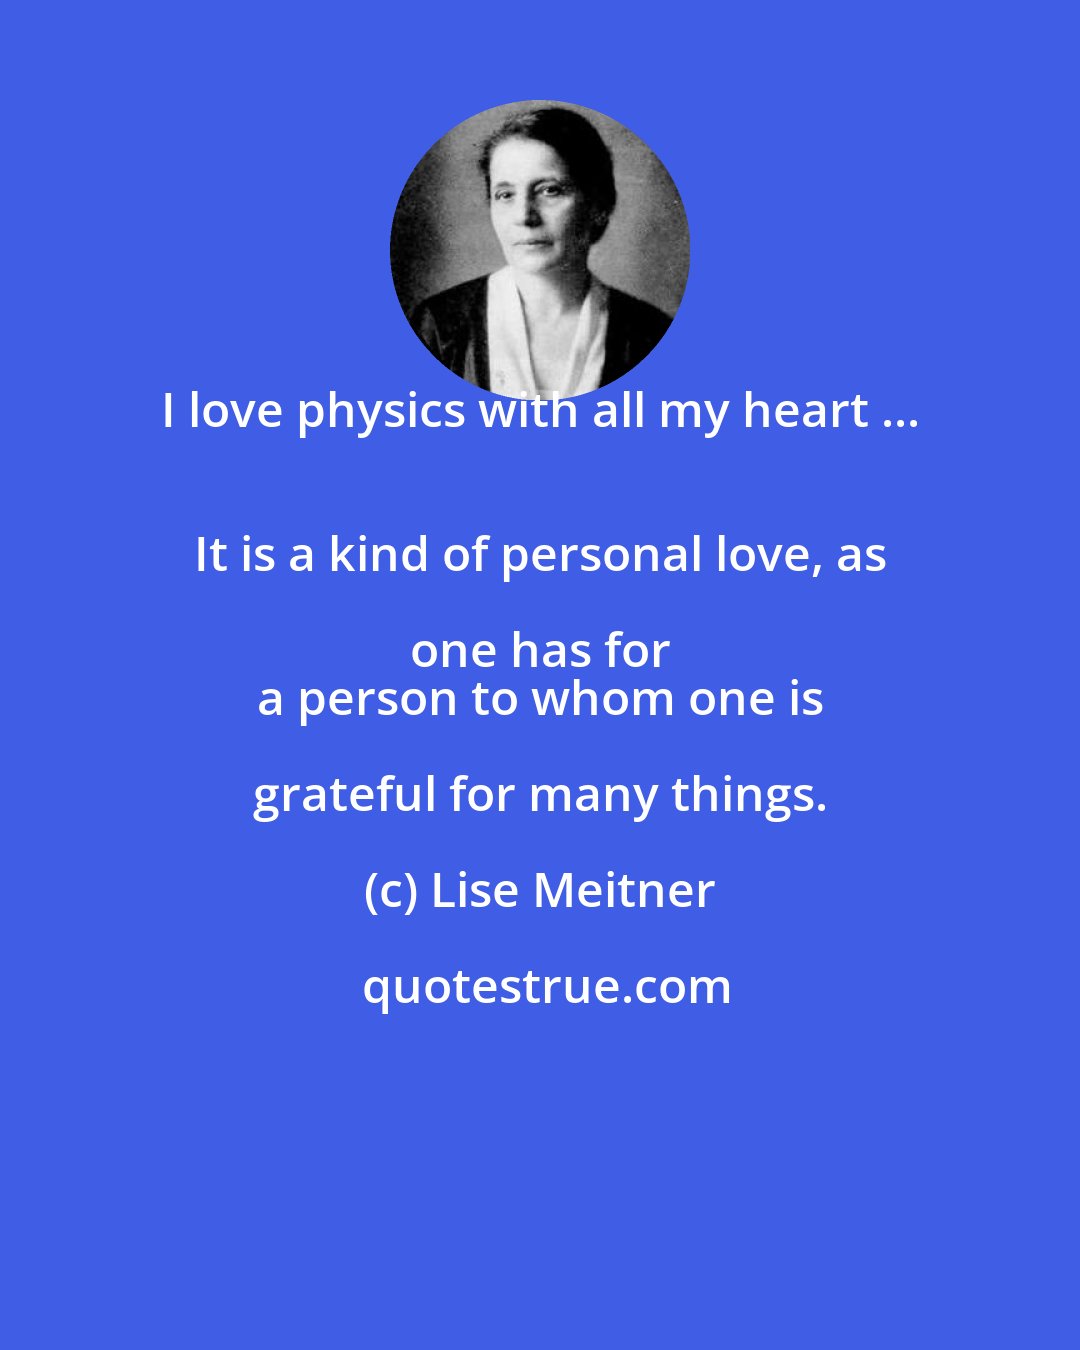 Lise Meitner: I love physics with all my heart ... 
 It is a kind of personal love, as one has for 
 a person to whom one is grateful for many things.